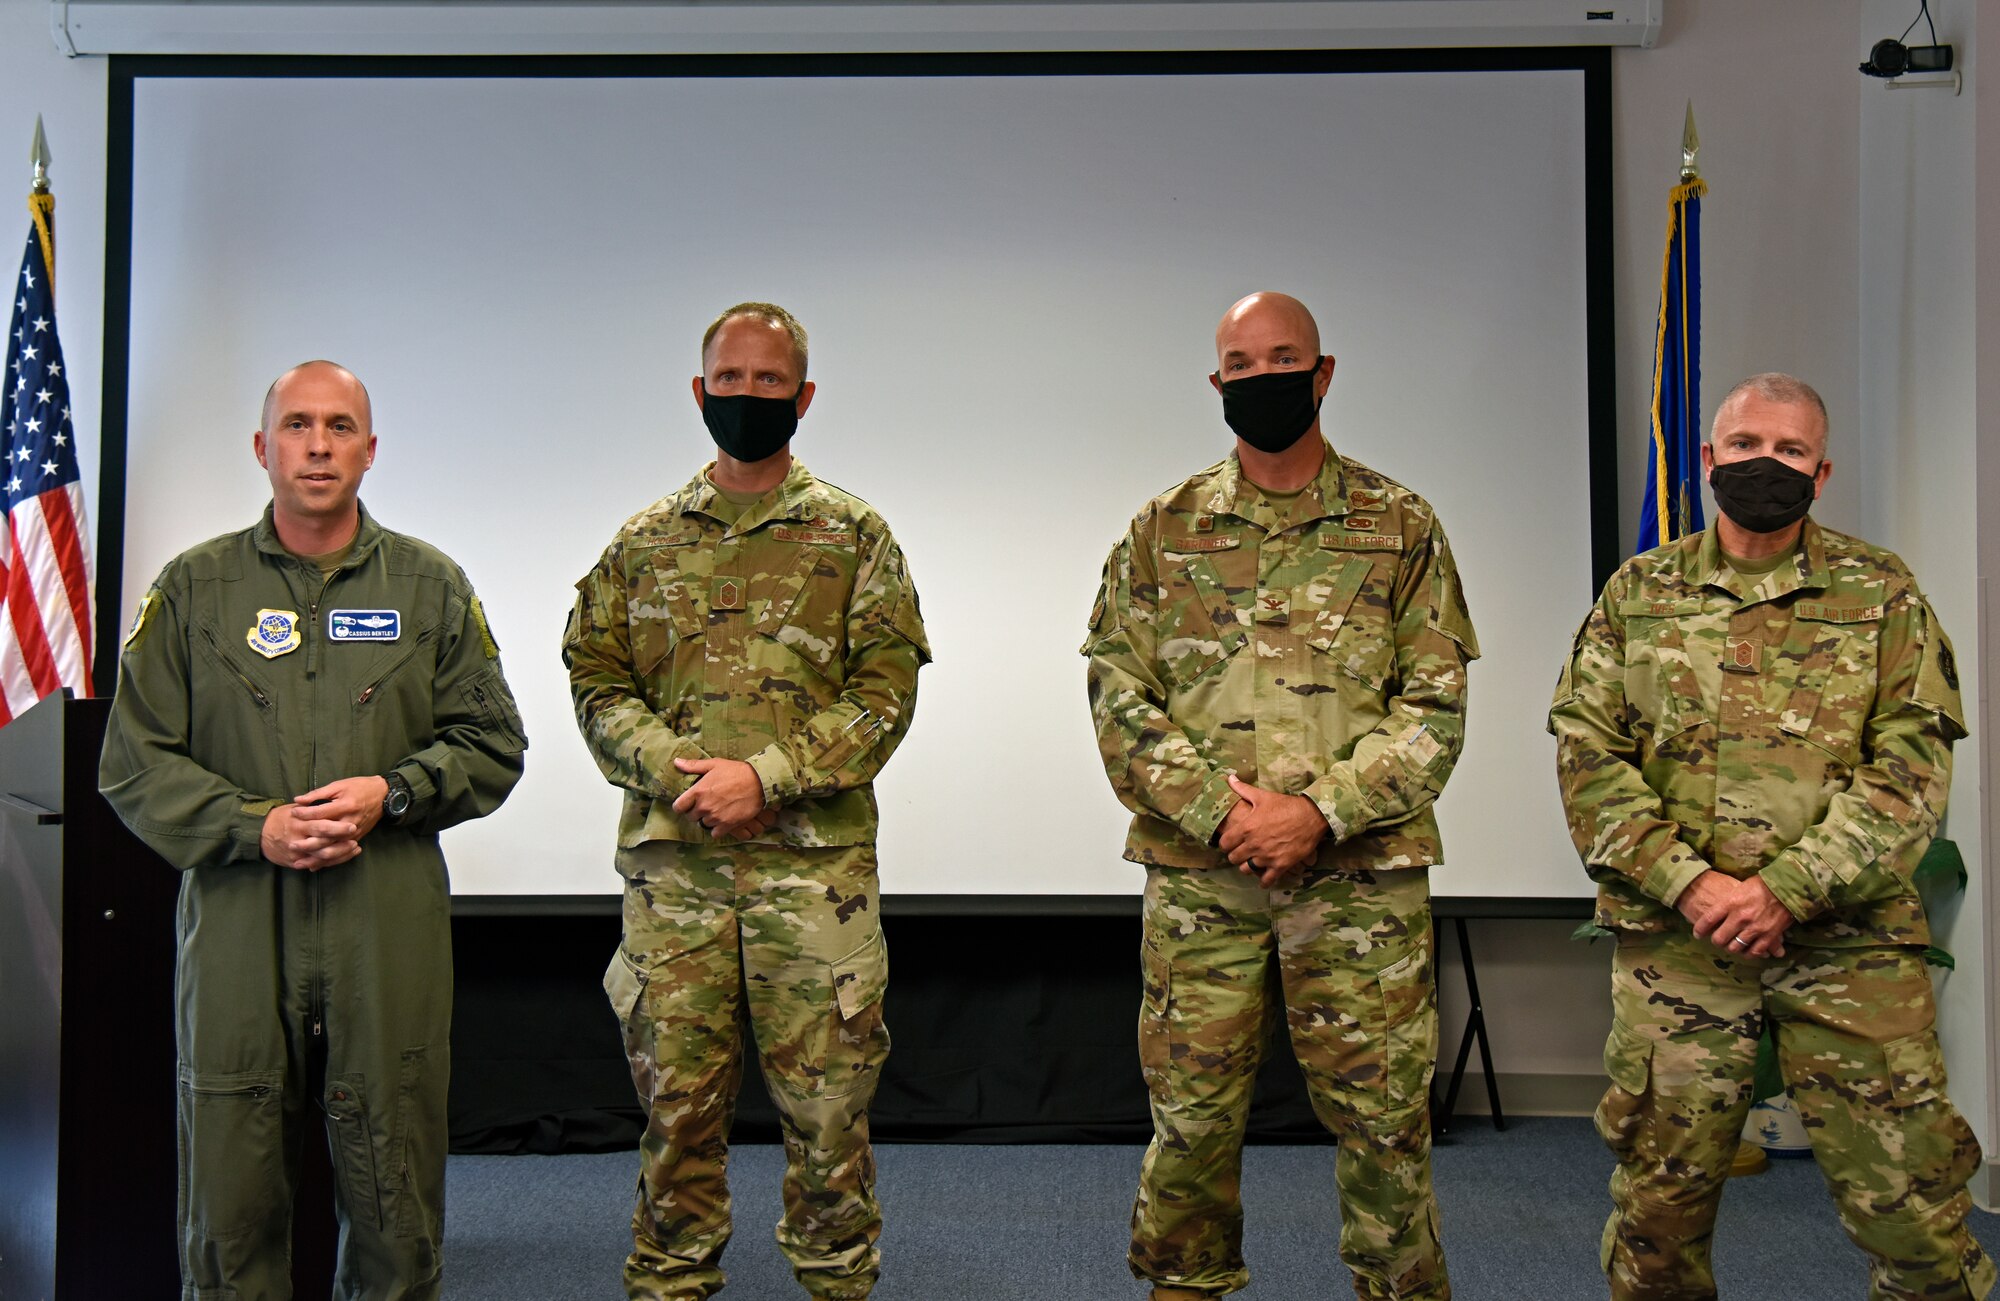 (from left) U.S. Air Force Col. Cassius Bentley, 92nd Air Refueling Wing commander, Chief Master Sgt. Jason Hodges, 92nd ARW Command Chief, Col. Larry Gardner, 141st ARW commander, and Chief Master Sgt. Brandon Ives, 141st ARW command chief, make opening remarks for the Back-to-School Town Hall at Fairchild Air Force Base, Washington, Aug. 20, 2020. Team Fairchild hosted a virtual Town Hall alongside fellow school district leaders and subject matter experts to discuss issues related to children returning to school and needing childcare amongst the COVID-19 pandemic. (U.S. Air Force photo by Staff Sgt. Jesenia Landaverde)